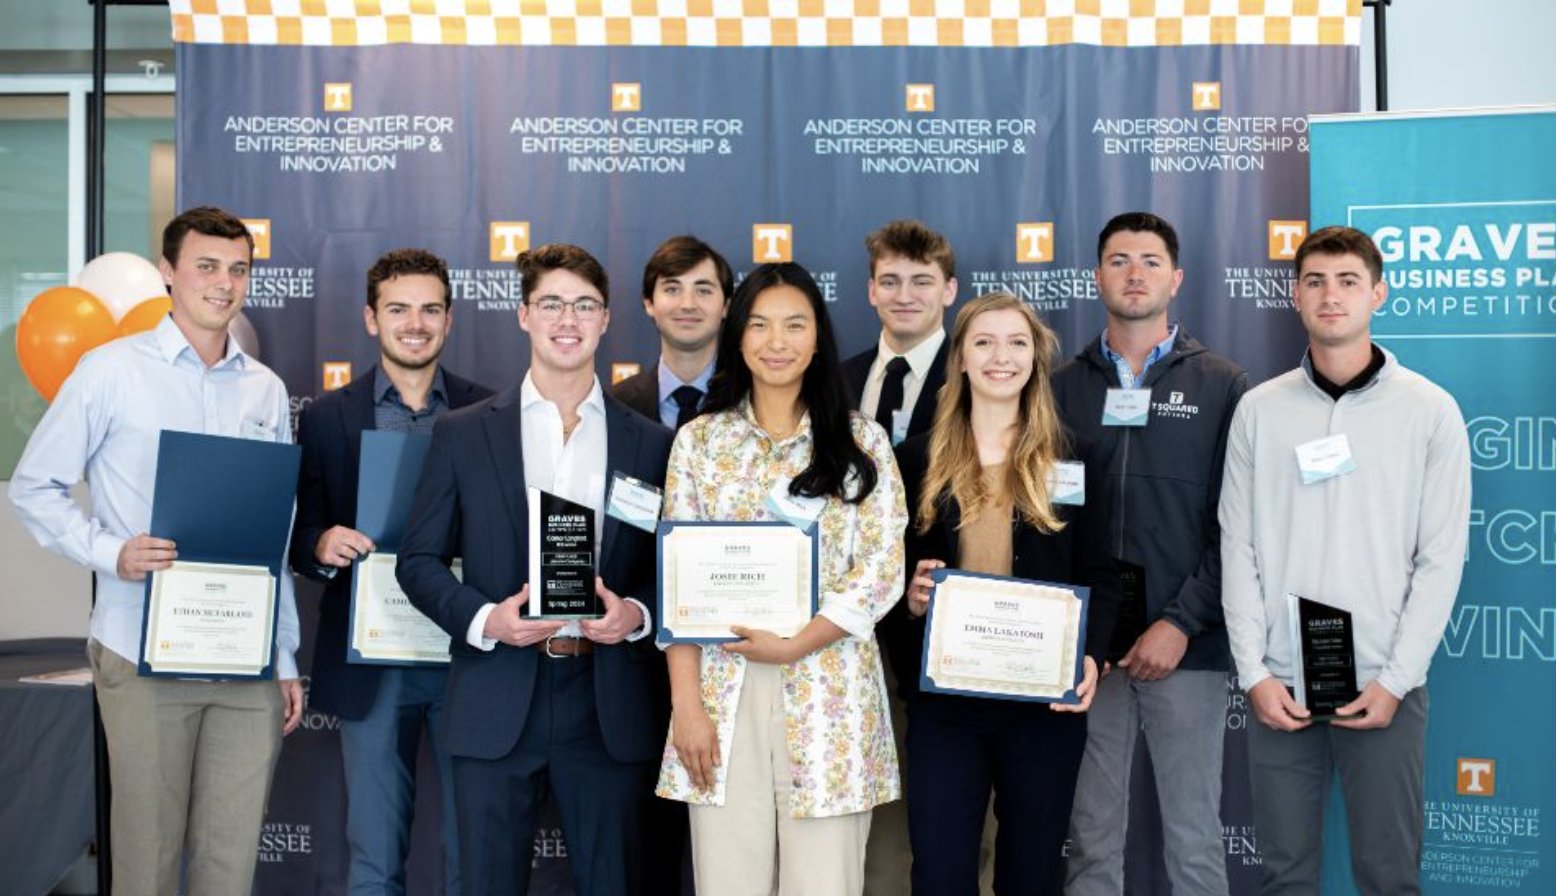 TCE Students Awarded at Graves Business Plan Competition